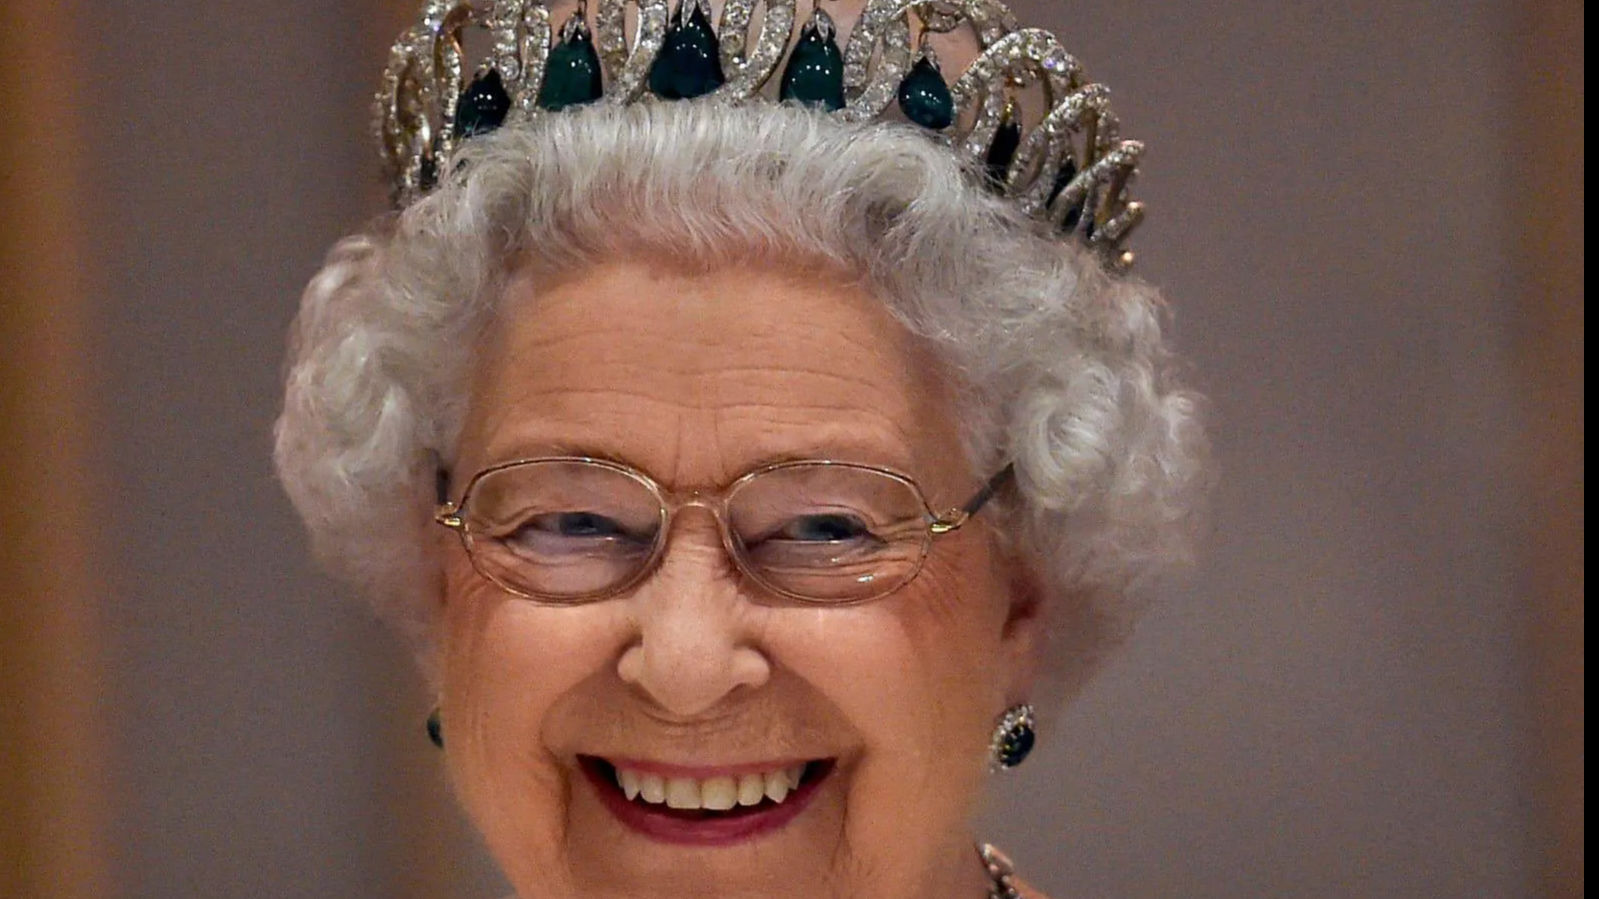 All you need to know about Queen Elizabeth II’s platinum jubilee celebration